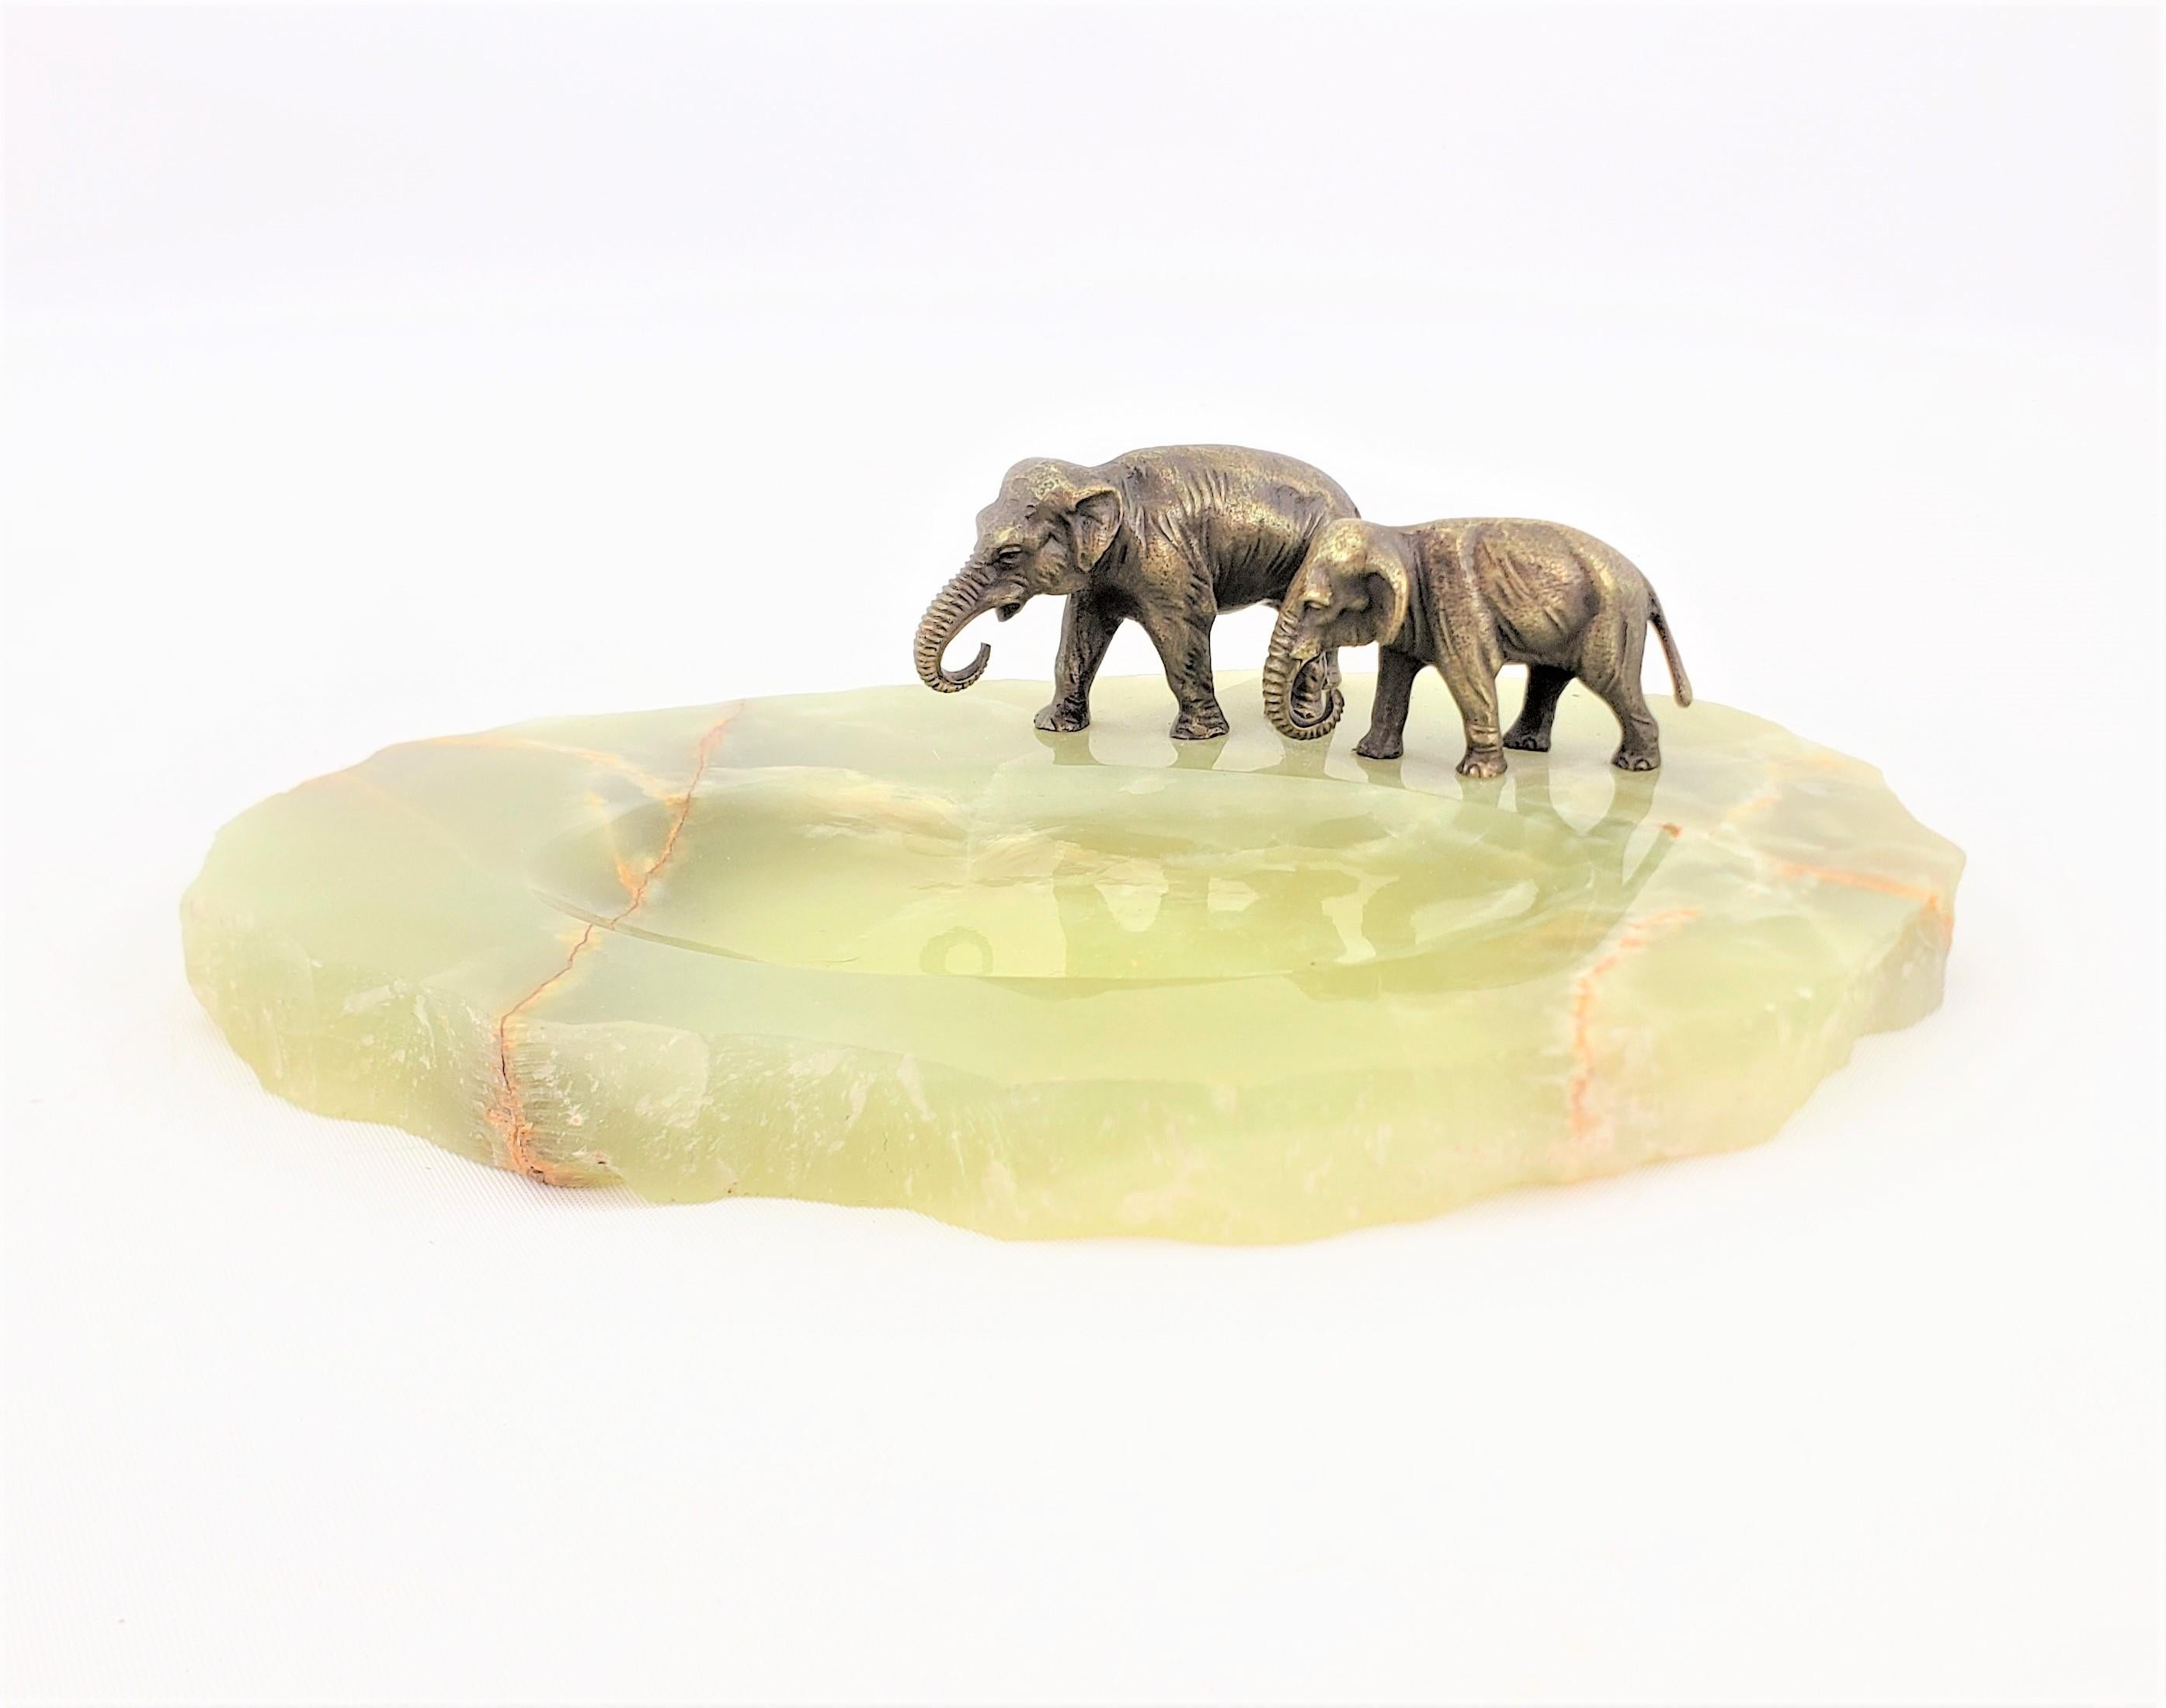 This antique decorative tray or vide-poche is unsigned, but presumed to have been made in Austria in approximately 1920 in an Art Deco style. The tray features two well executed and ornately cast and patinated elephants which are mounted on a rough